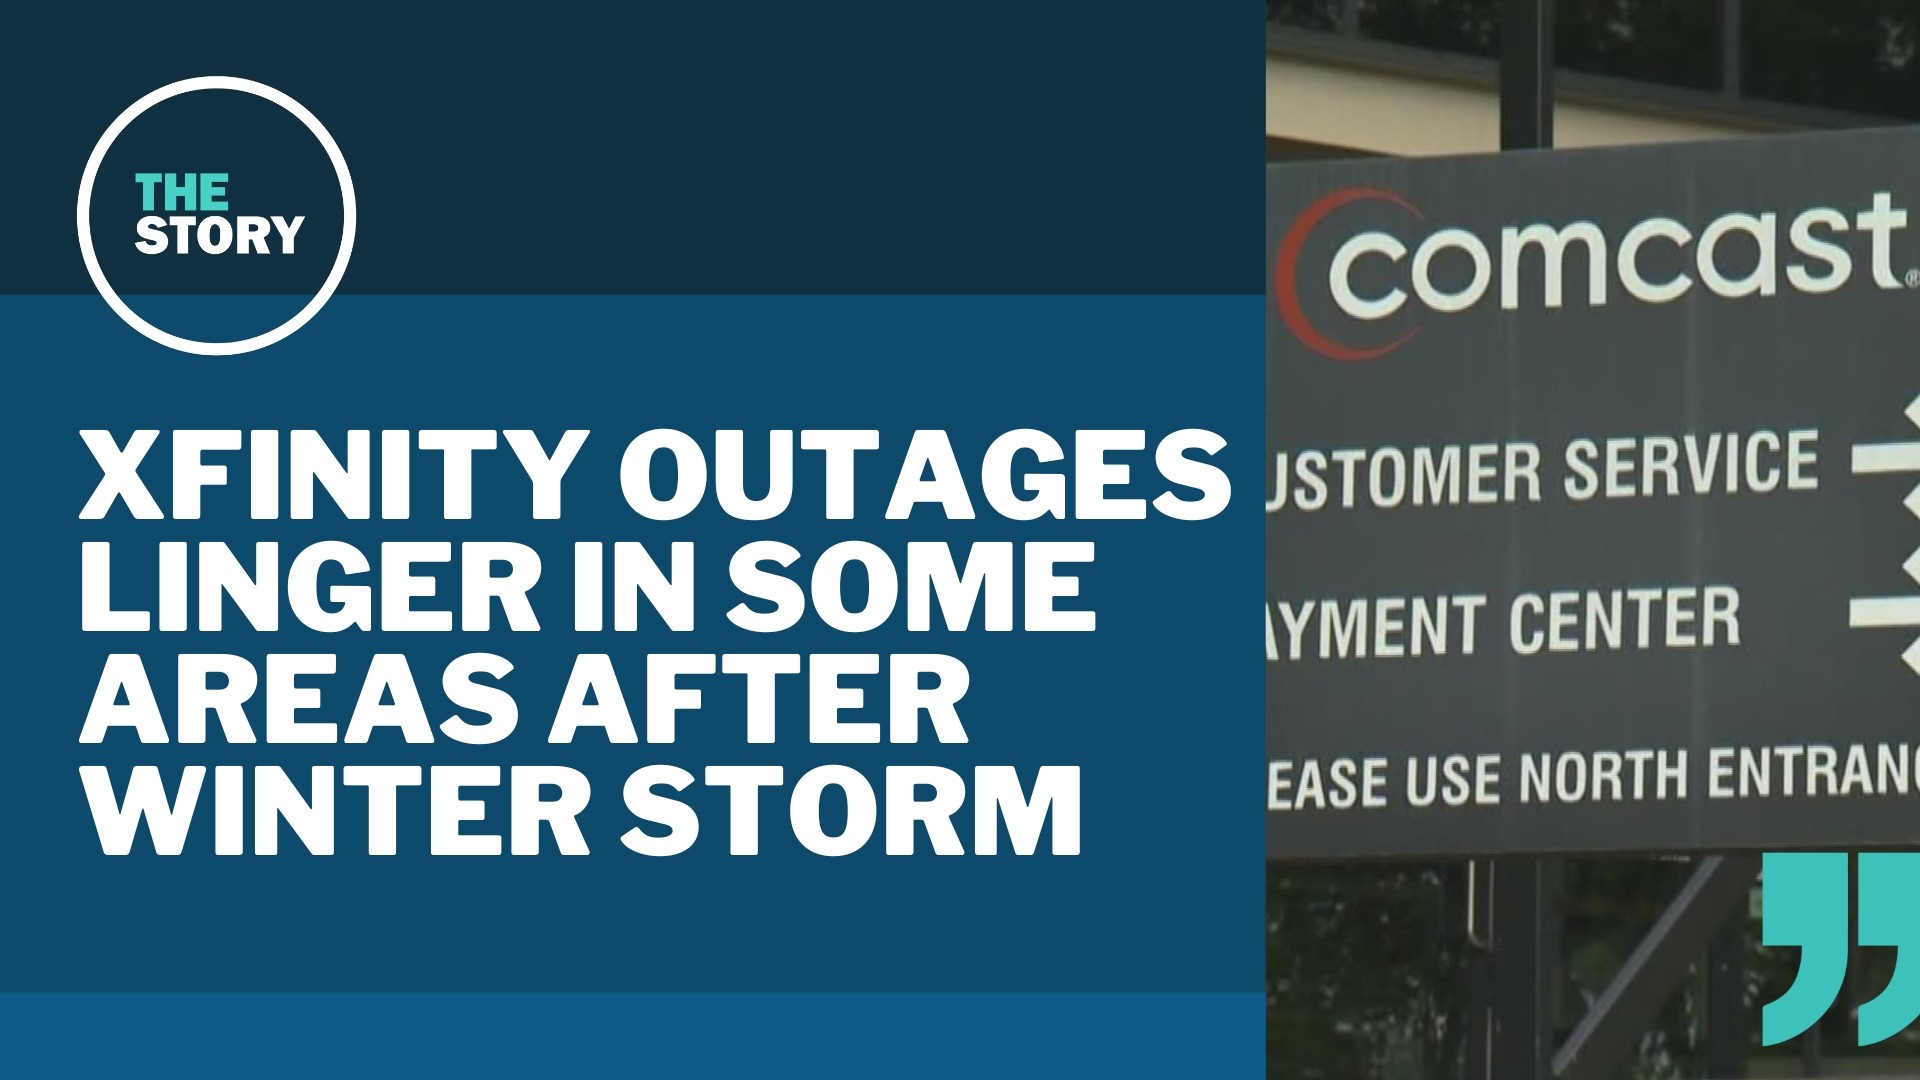 In some areas, viewers have said that internet outages long outlasted power outages. Here's what Comcast had to say about it.